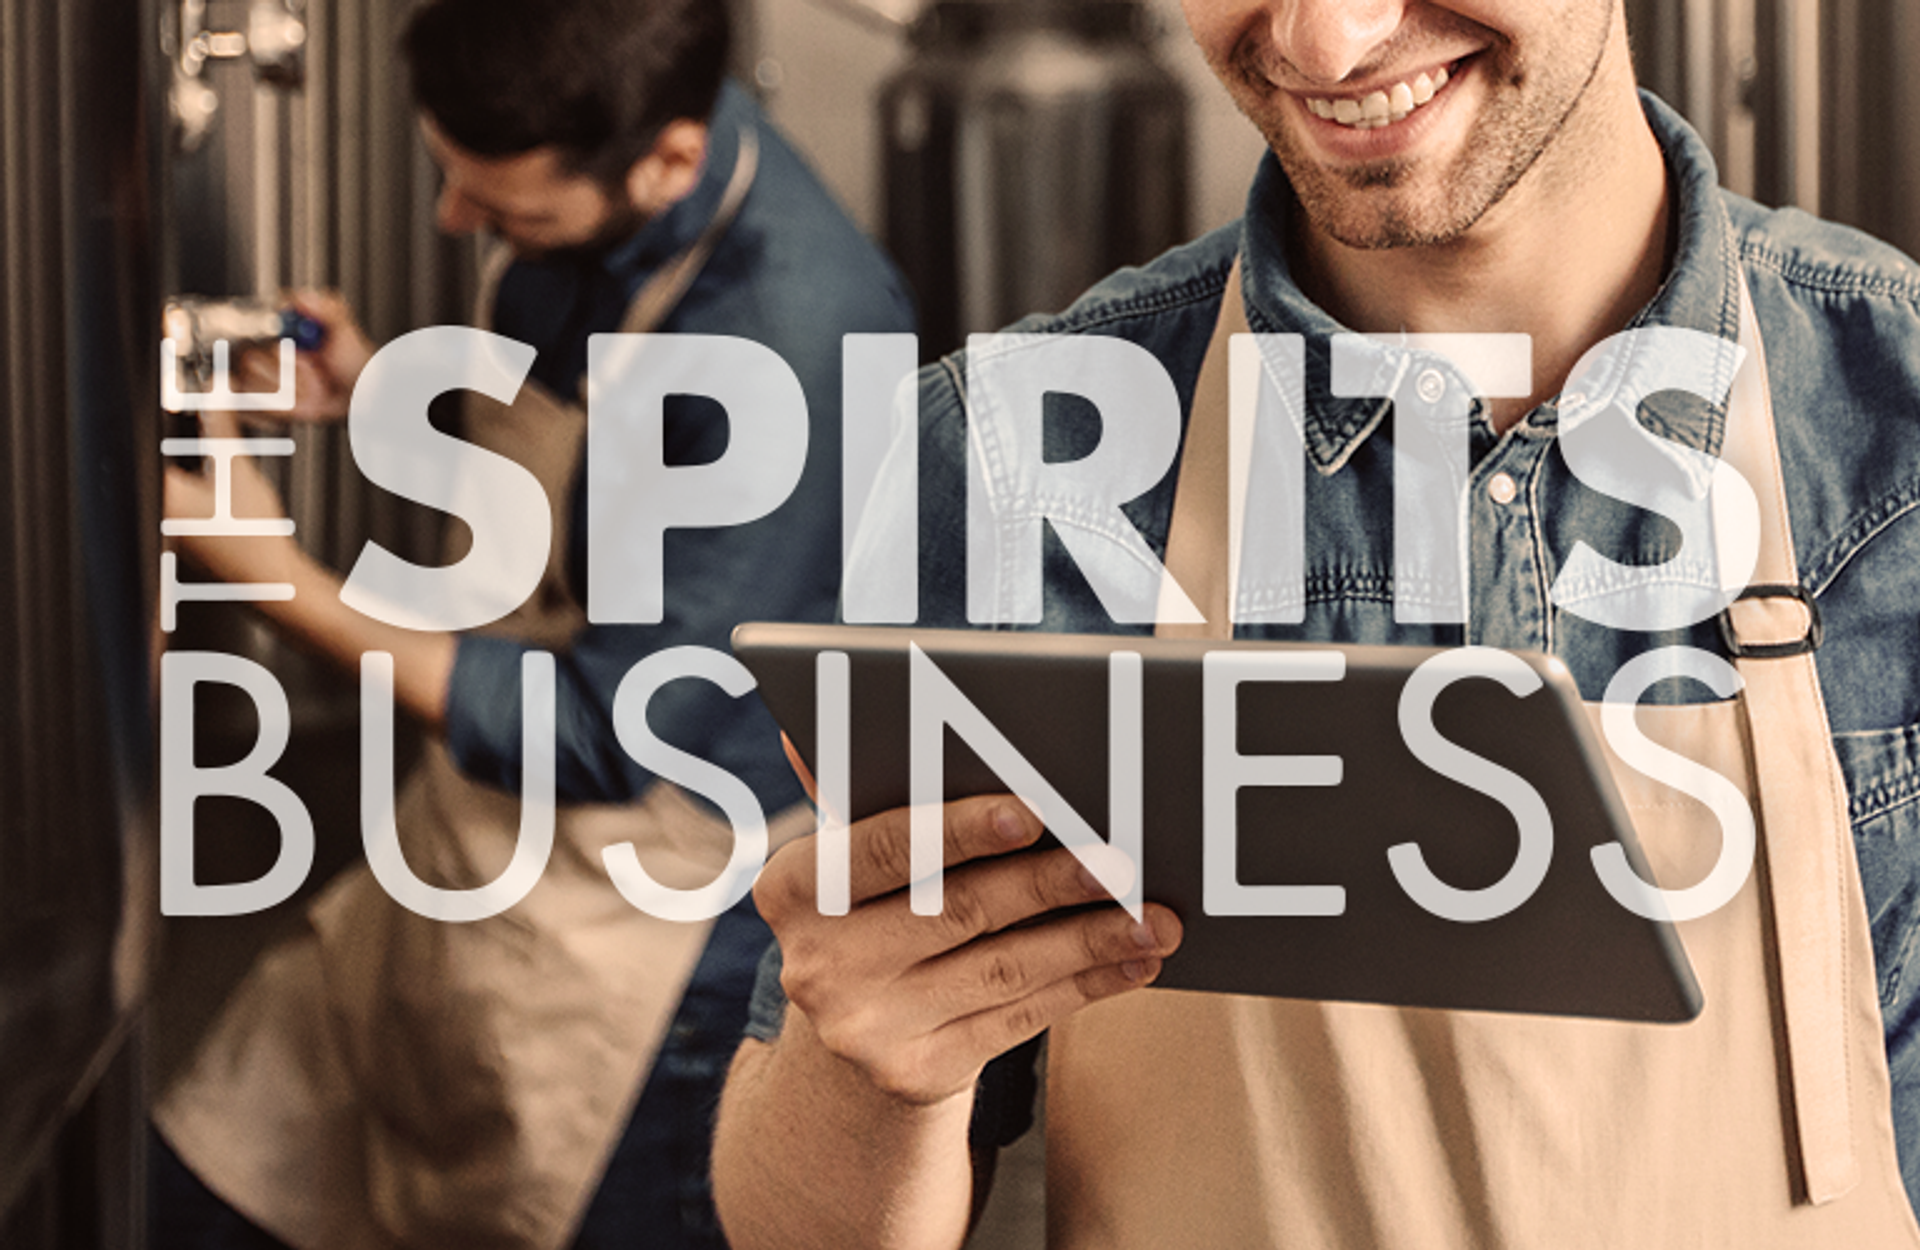 Proofworks and The Spirits Business